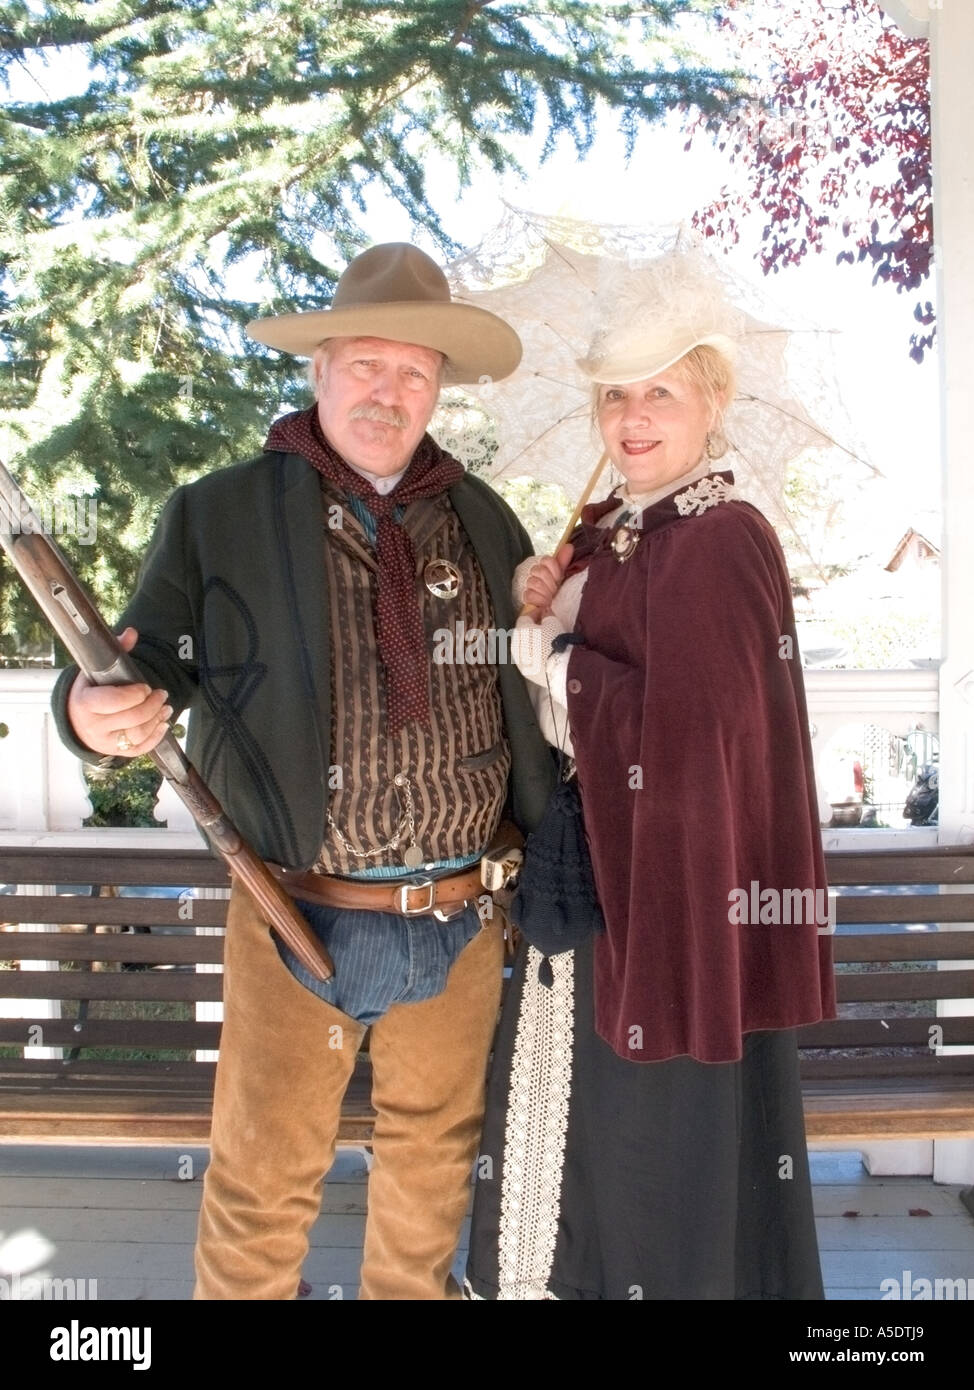 Actors/performers dressed in period costumes from the California Gold Rush Stock Photo